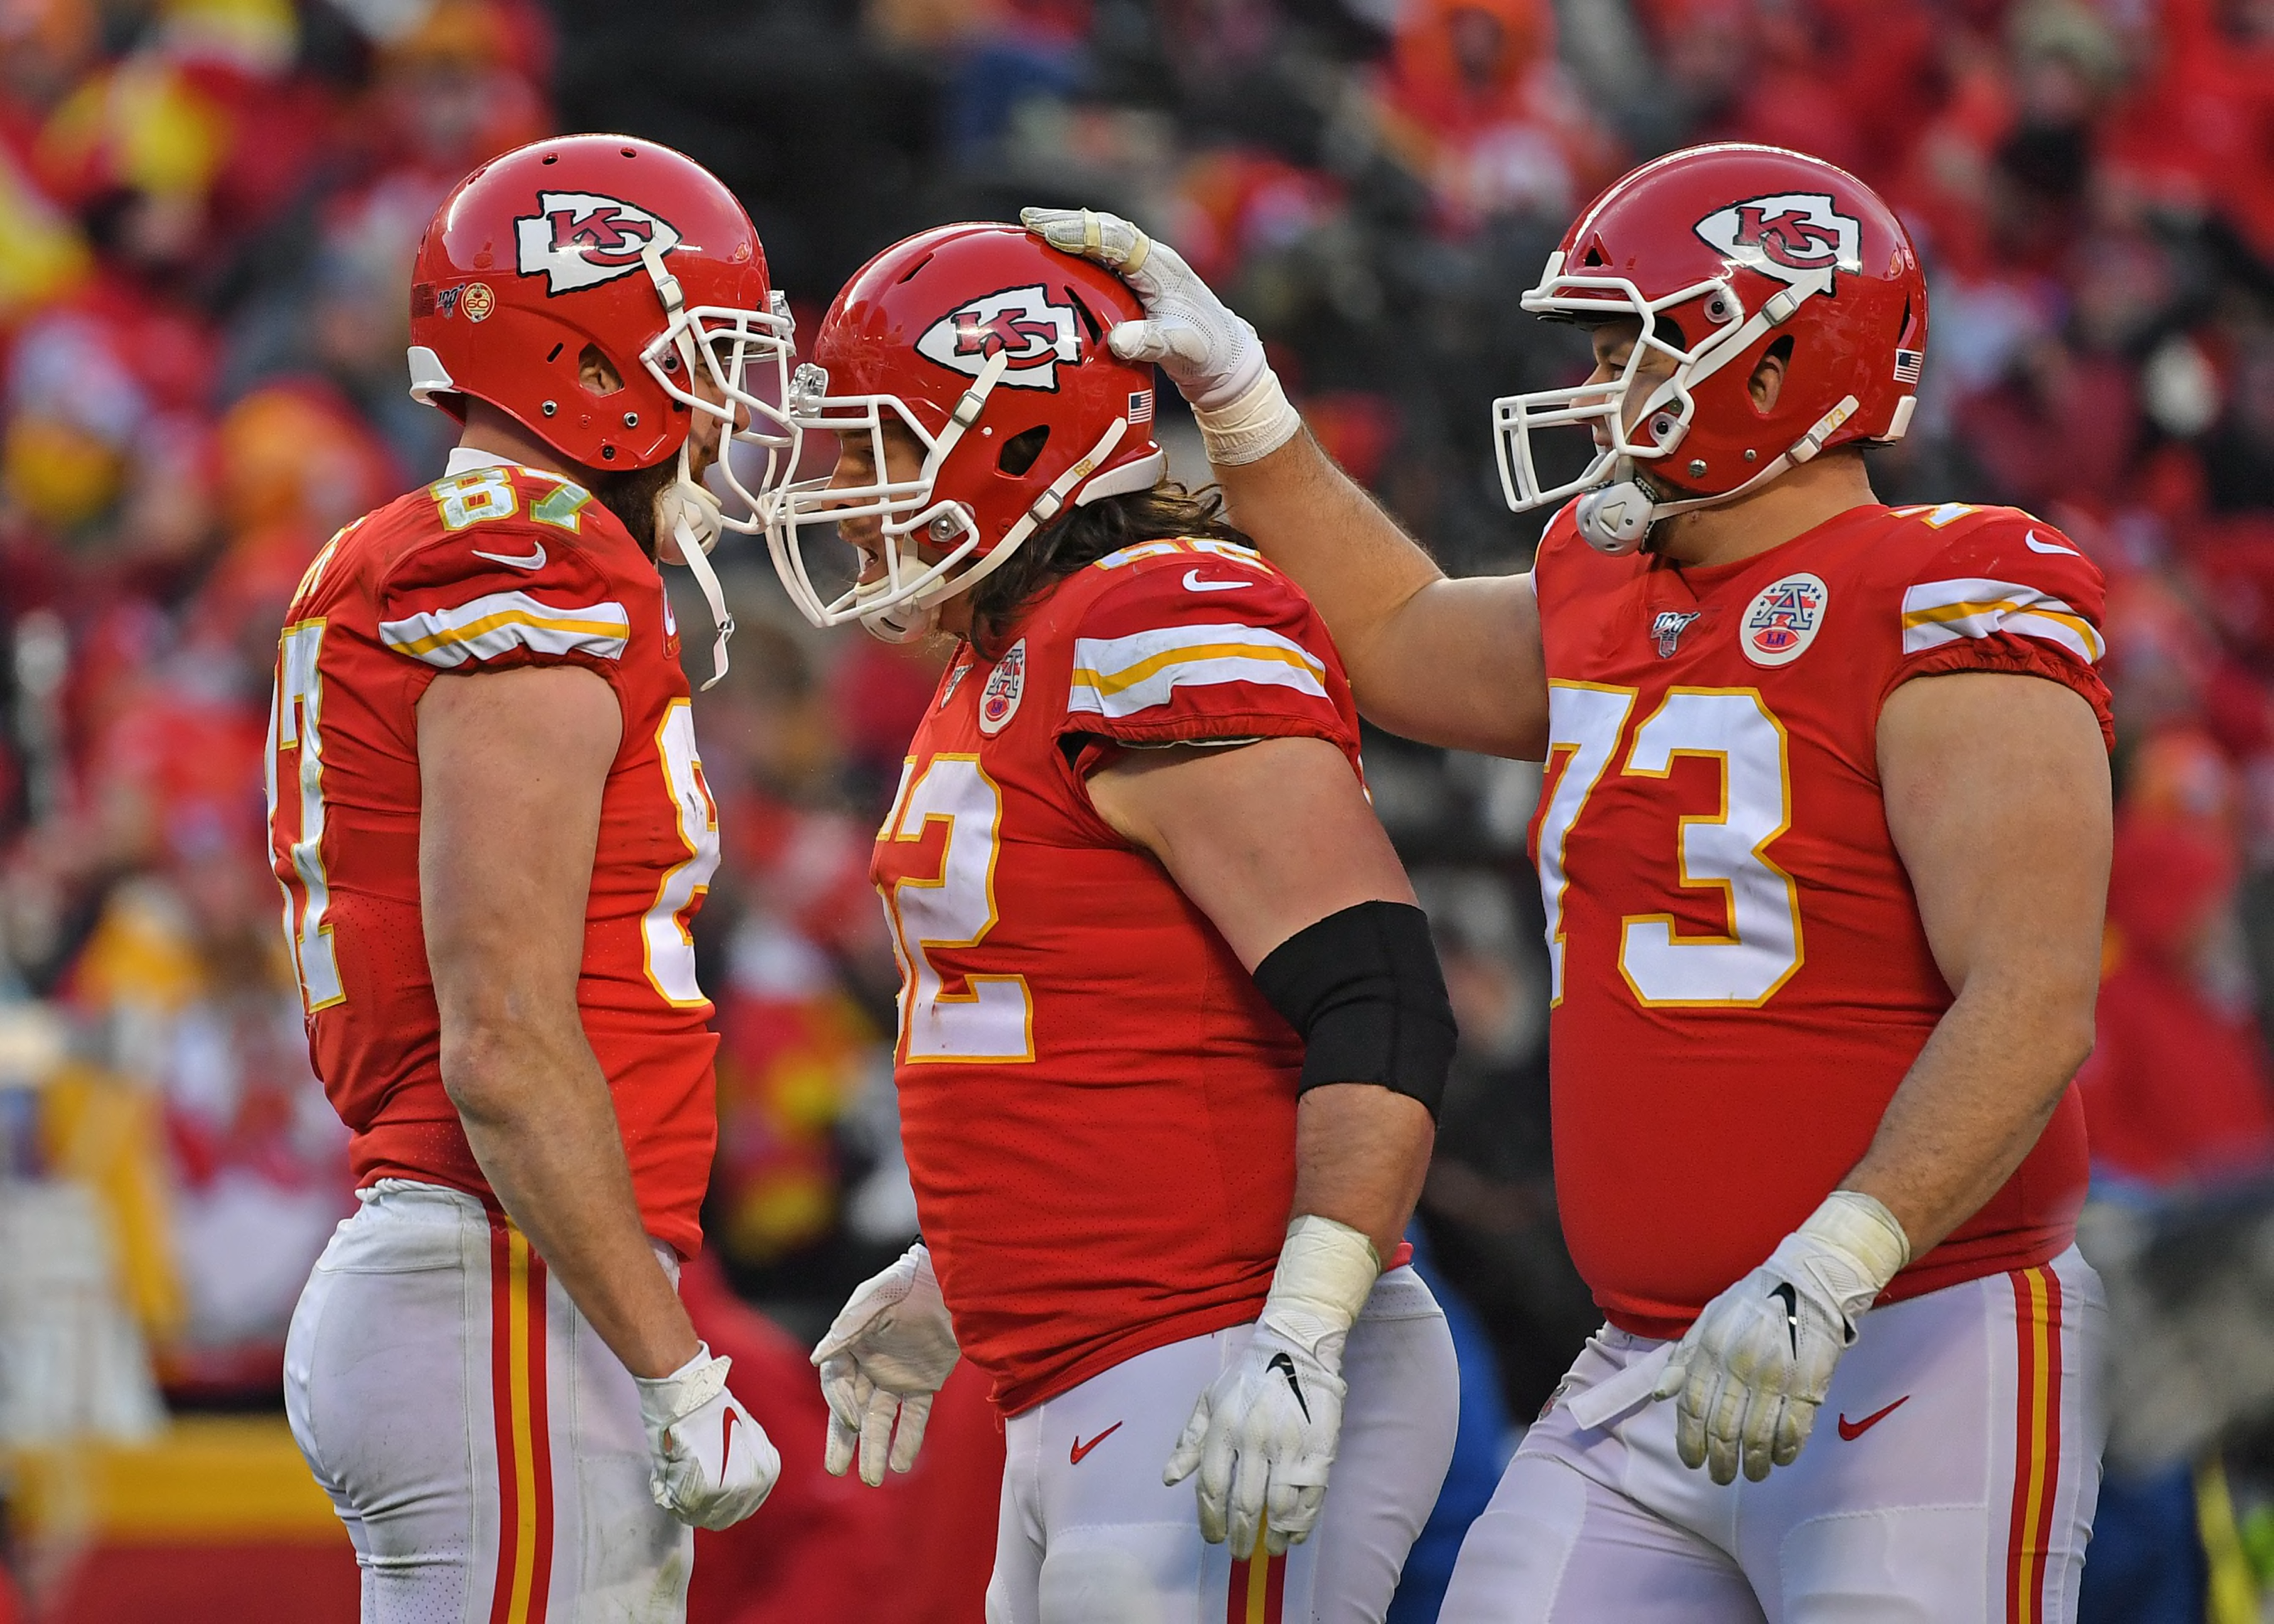 Kansas City Chiefs: Four match-ups to watch in Super Bowl LIV - Page 2